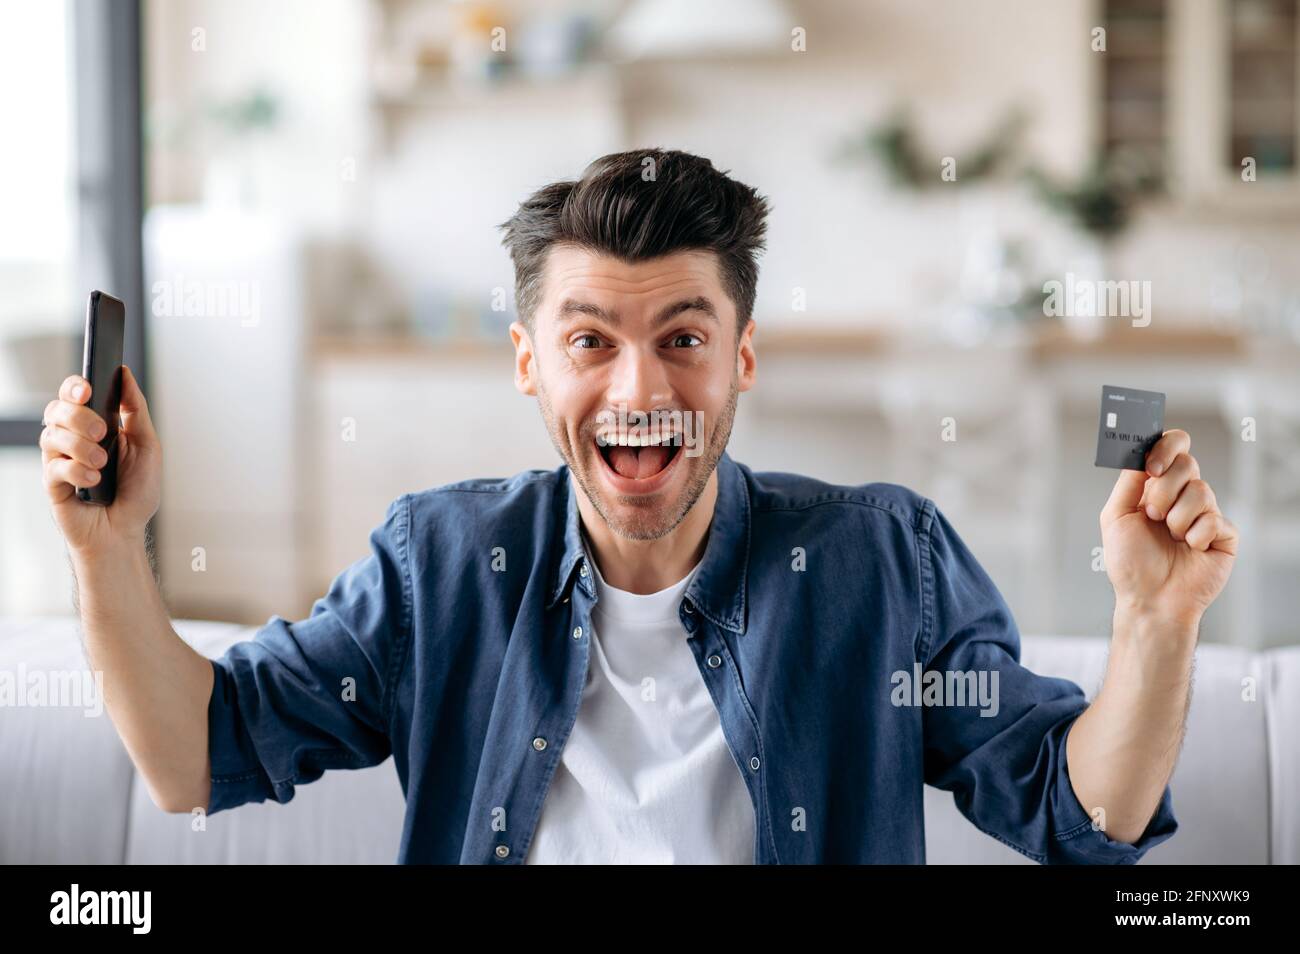 Amazed positive caucasian unshaven guy in a denim shirt, holds his smartphone in one hand and a credit card in the other, made an online payment transaction, shopping online, happy with good shopping Stock Photo